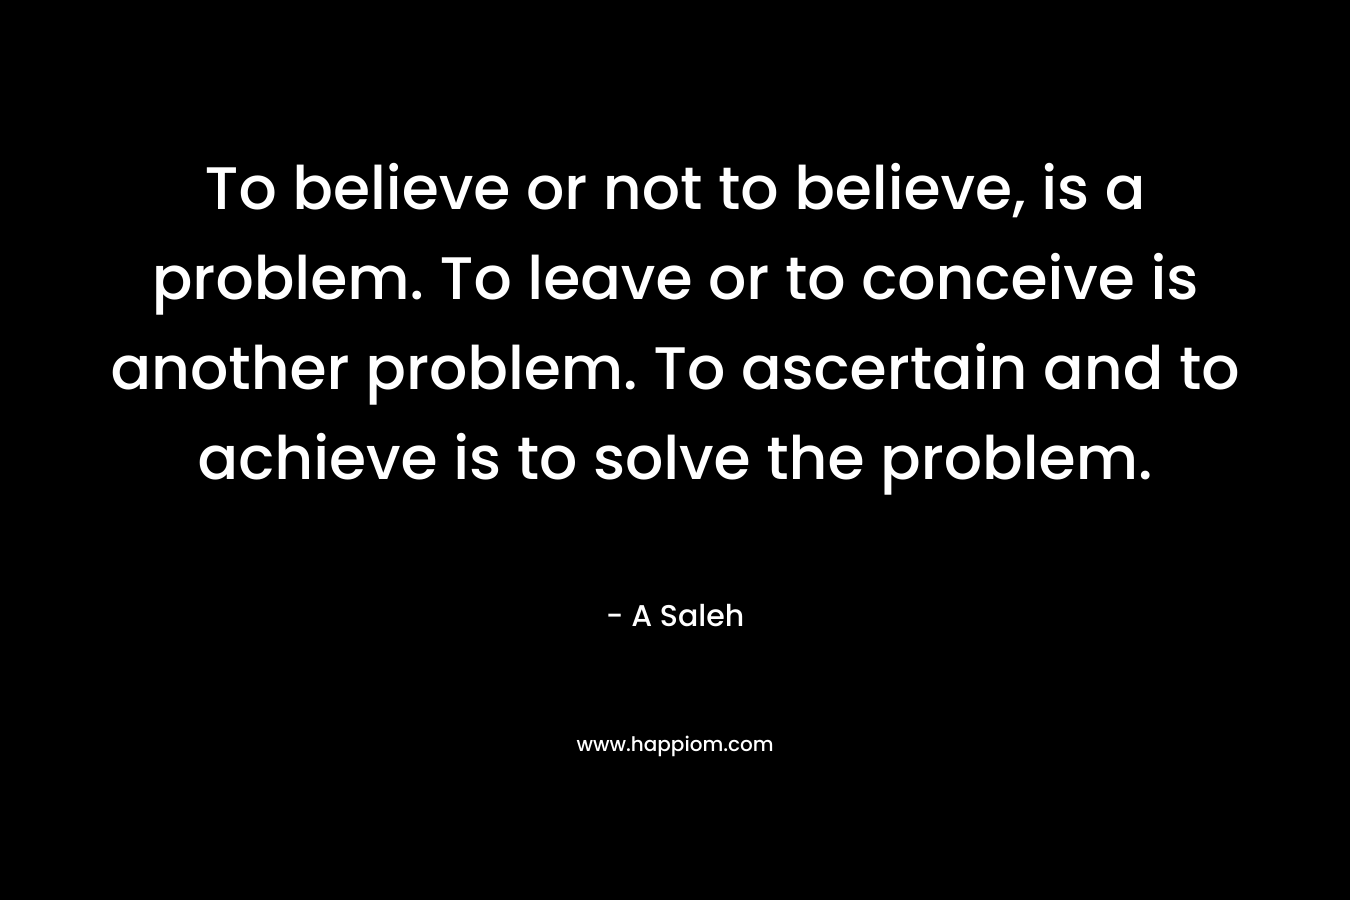 To believe or not to believe, is a problem. To leave or to conceive is another problem. To ascertain and to achieve is to solve the problem.